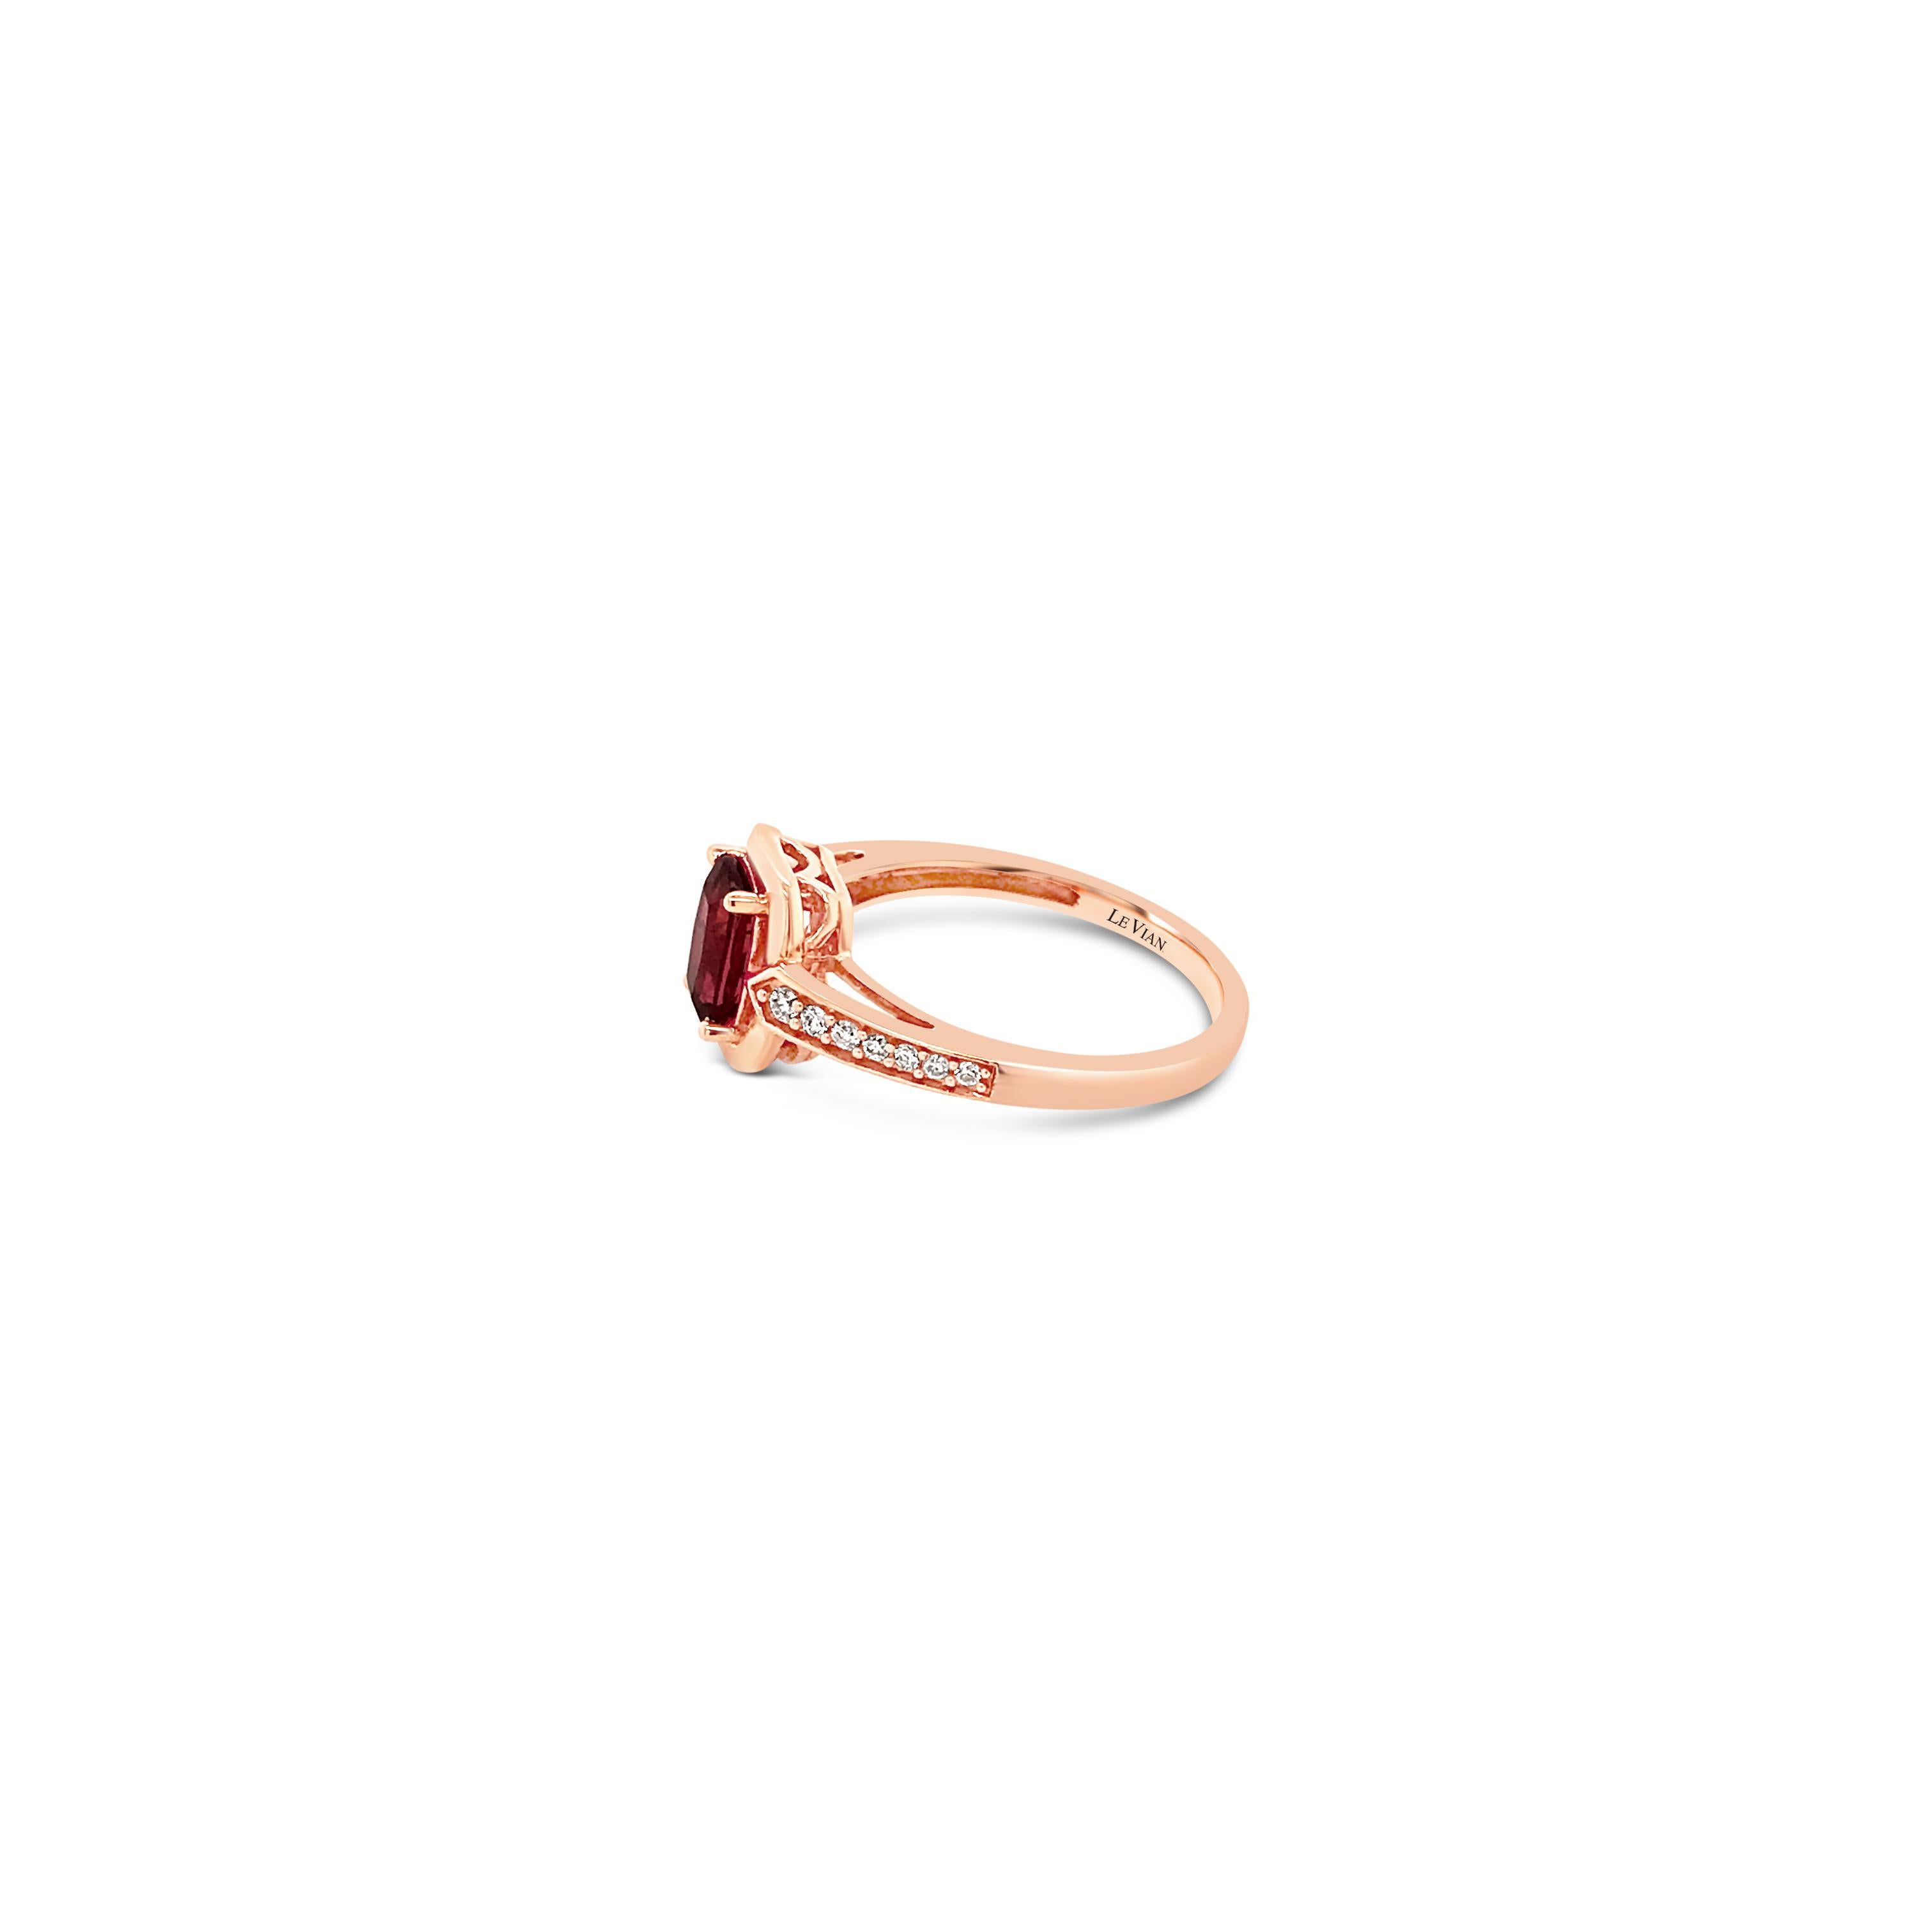 Le Vian® Ring featuring 7/8 cts. Raspberry Rubellite™, 1/10 cts. Vanilla Diamonds®  set in 14K Strawberry Gold®
